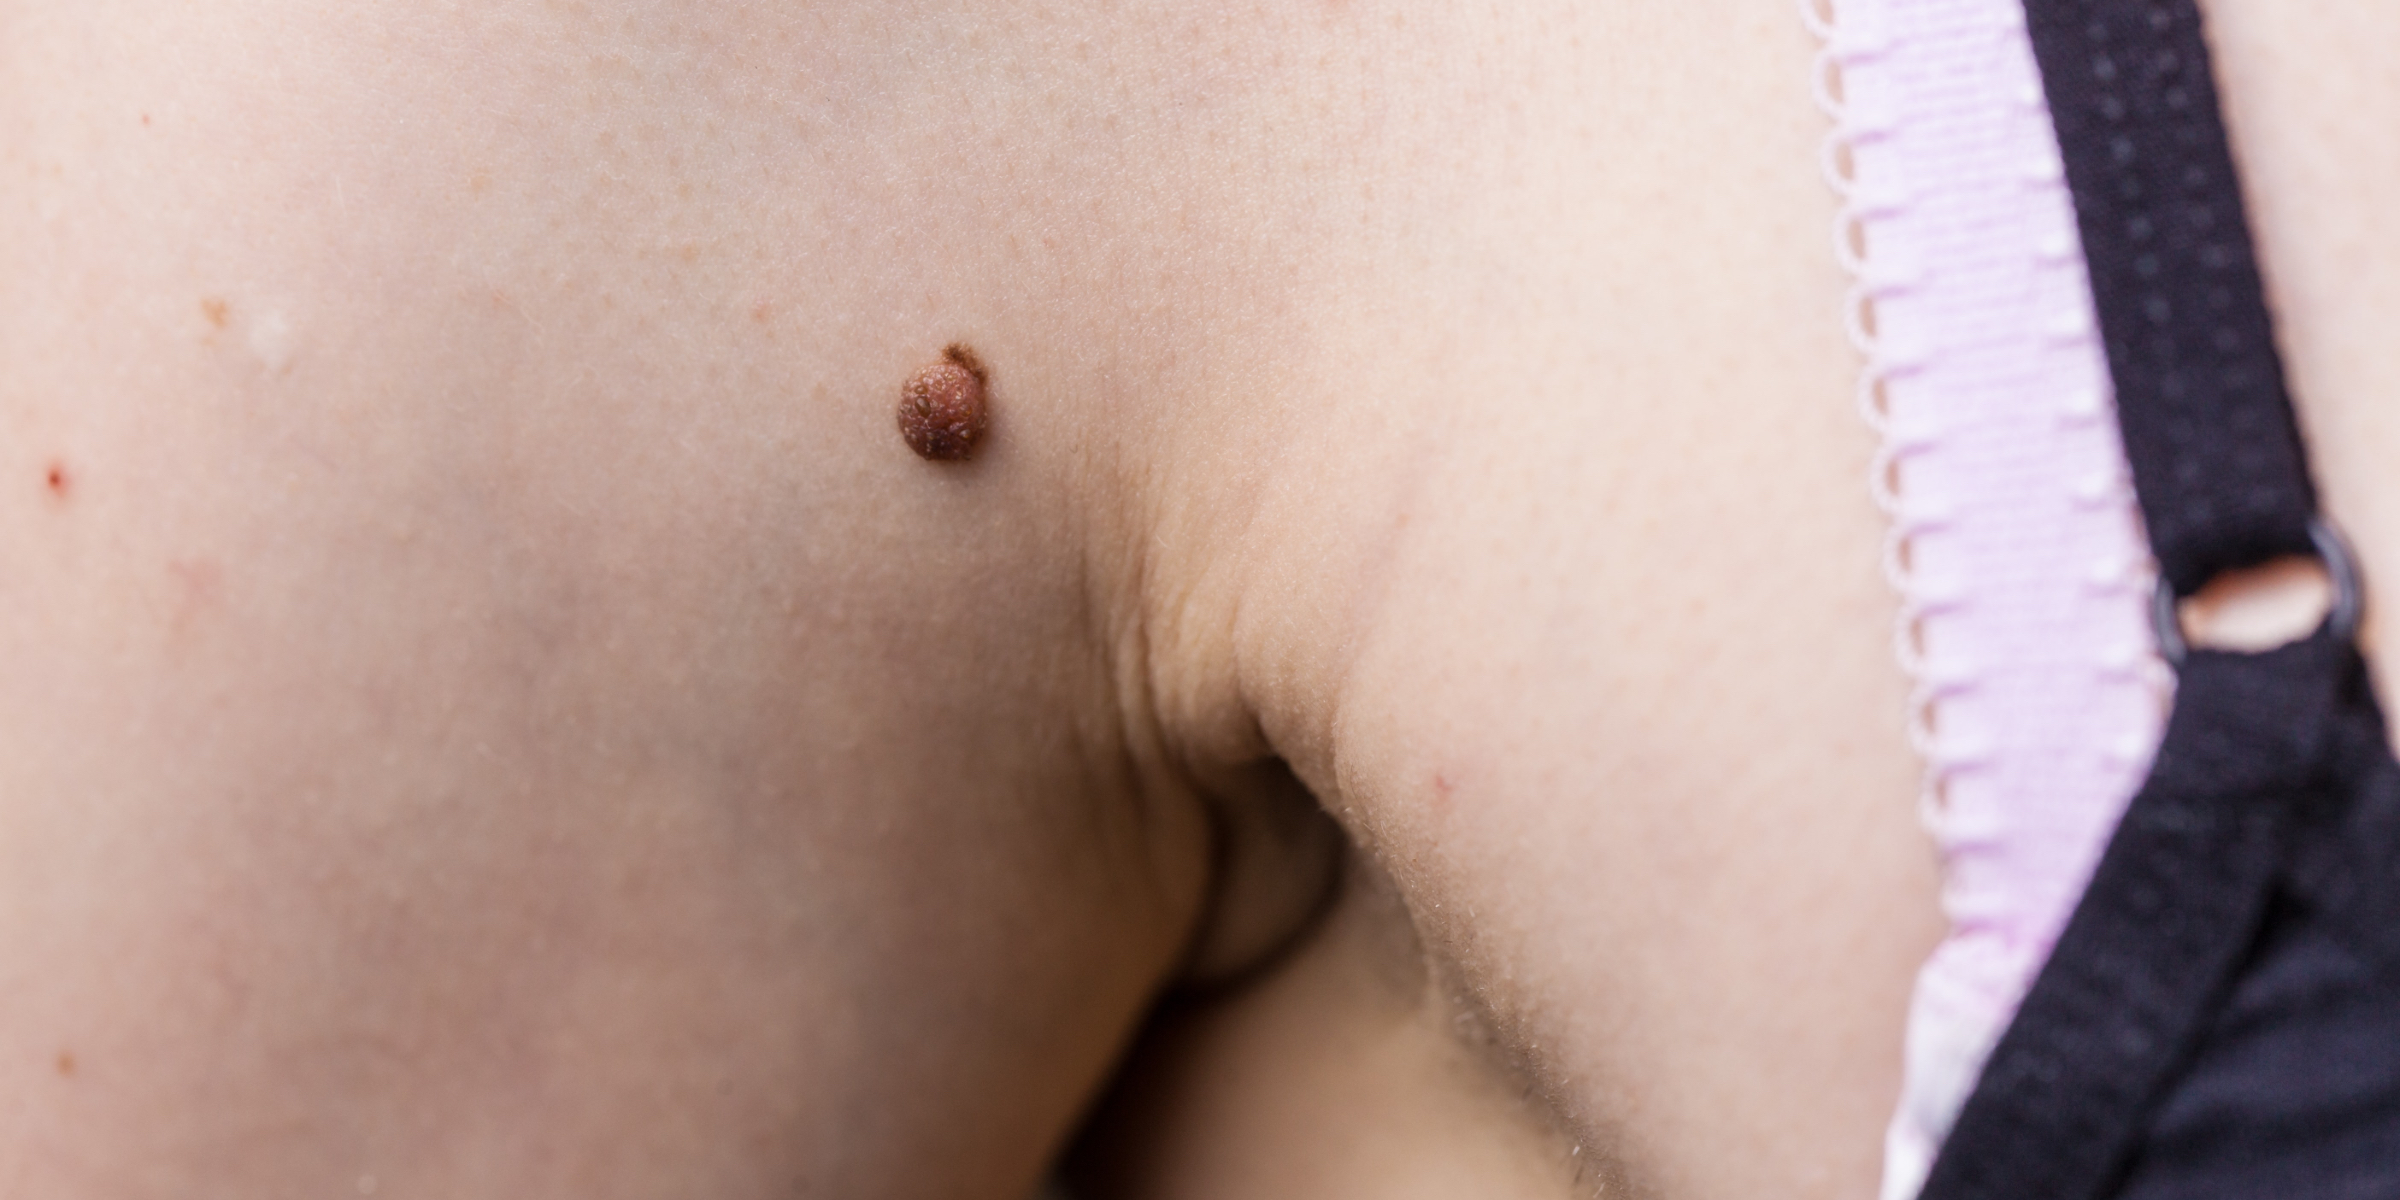 Skin tag on a woman's arm